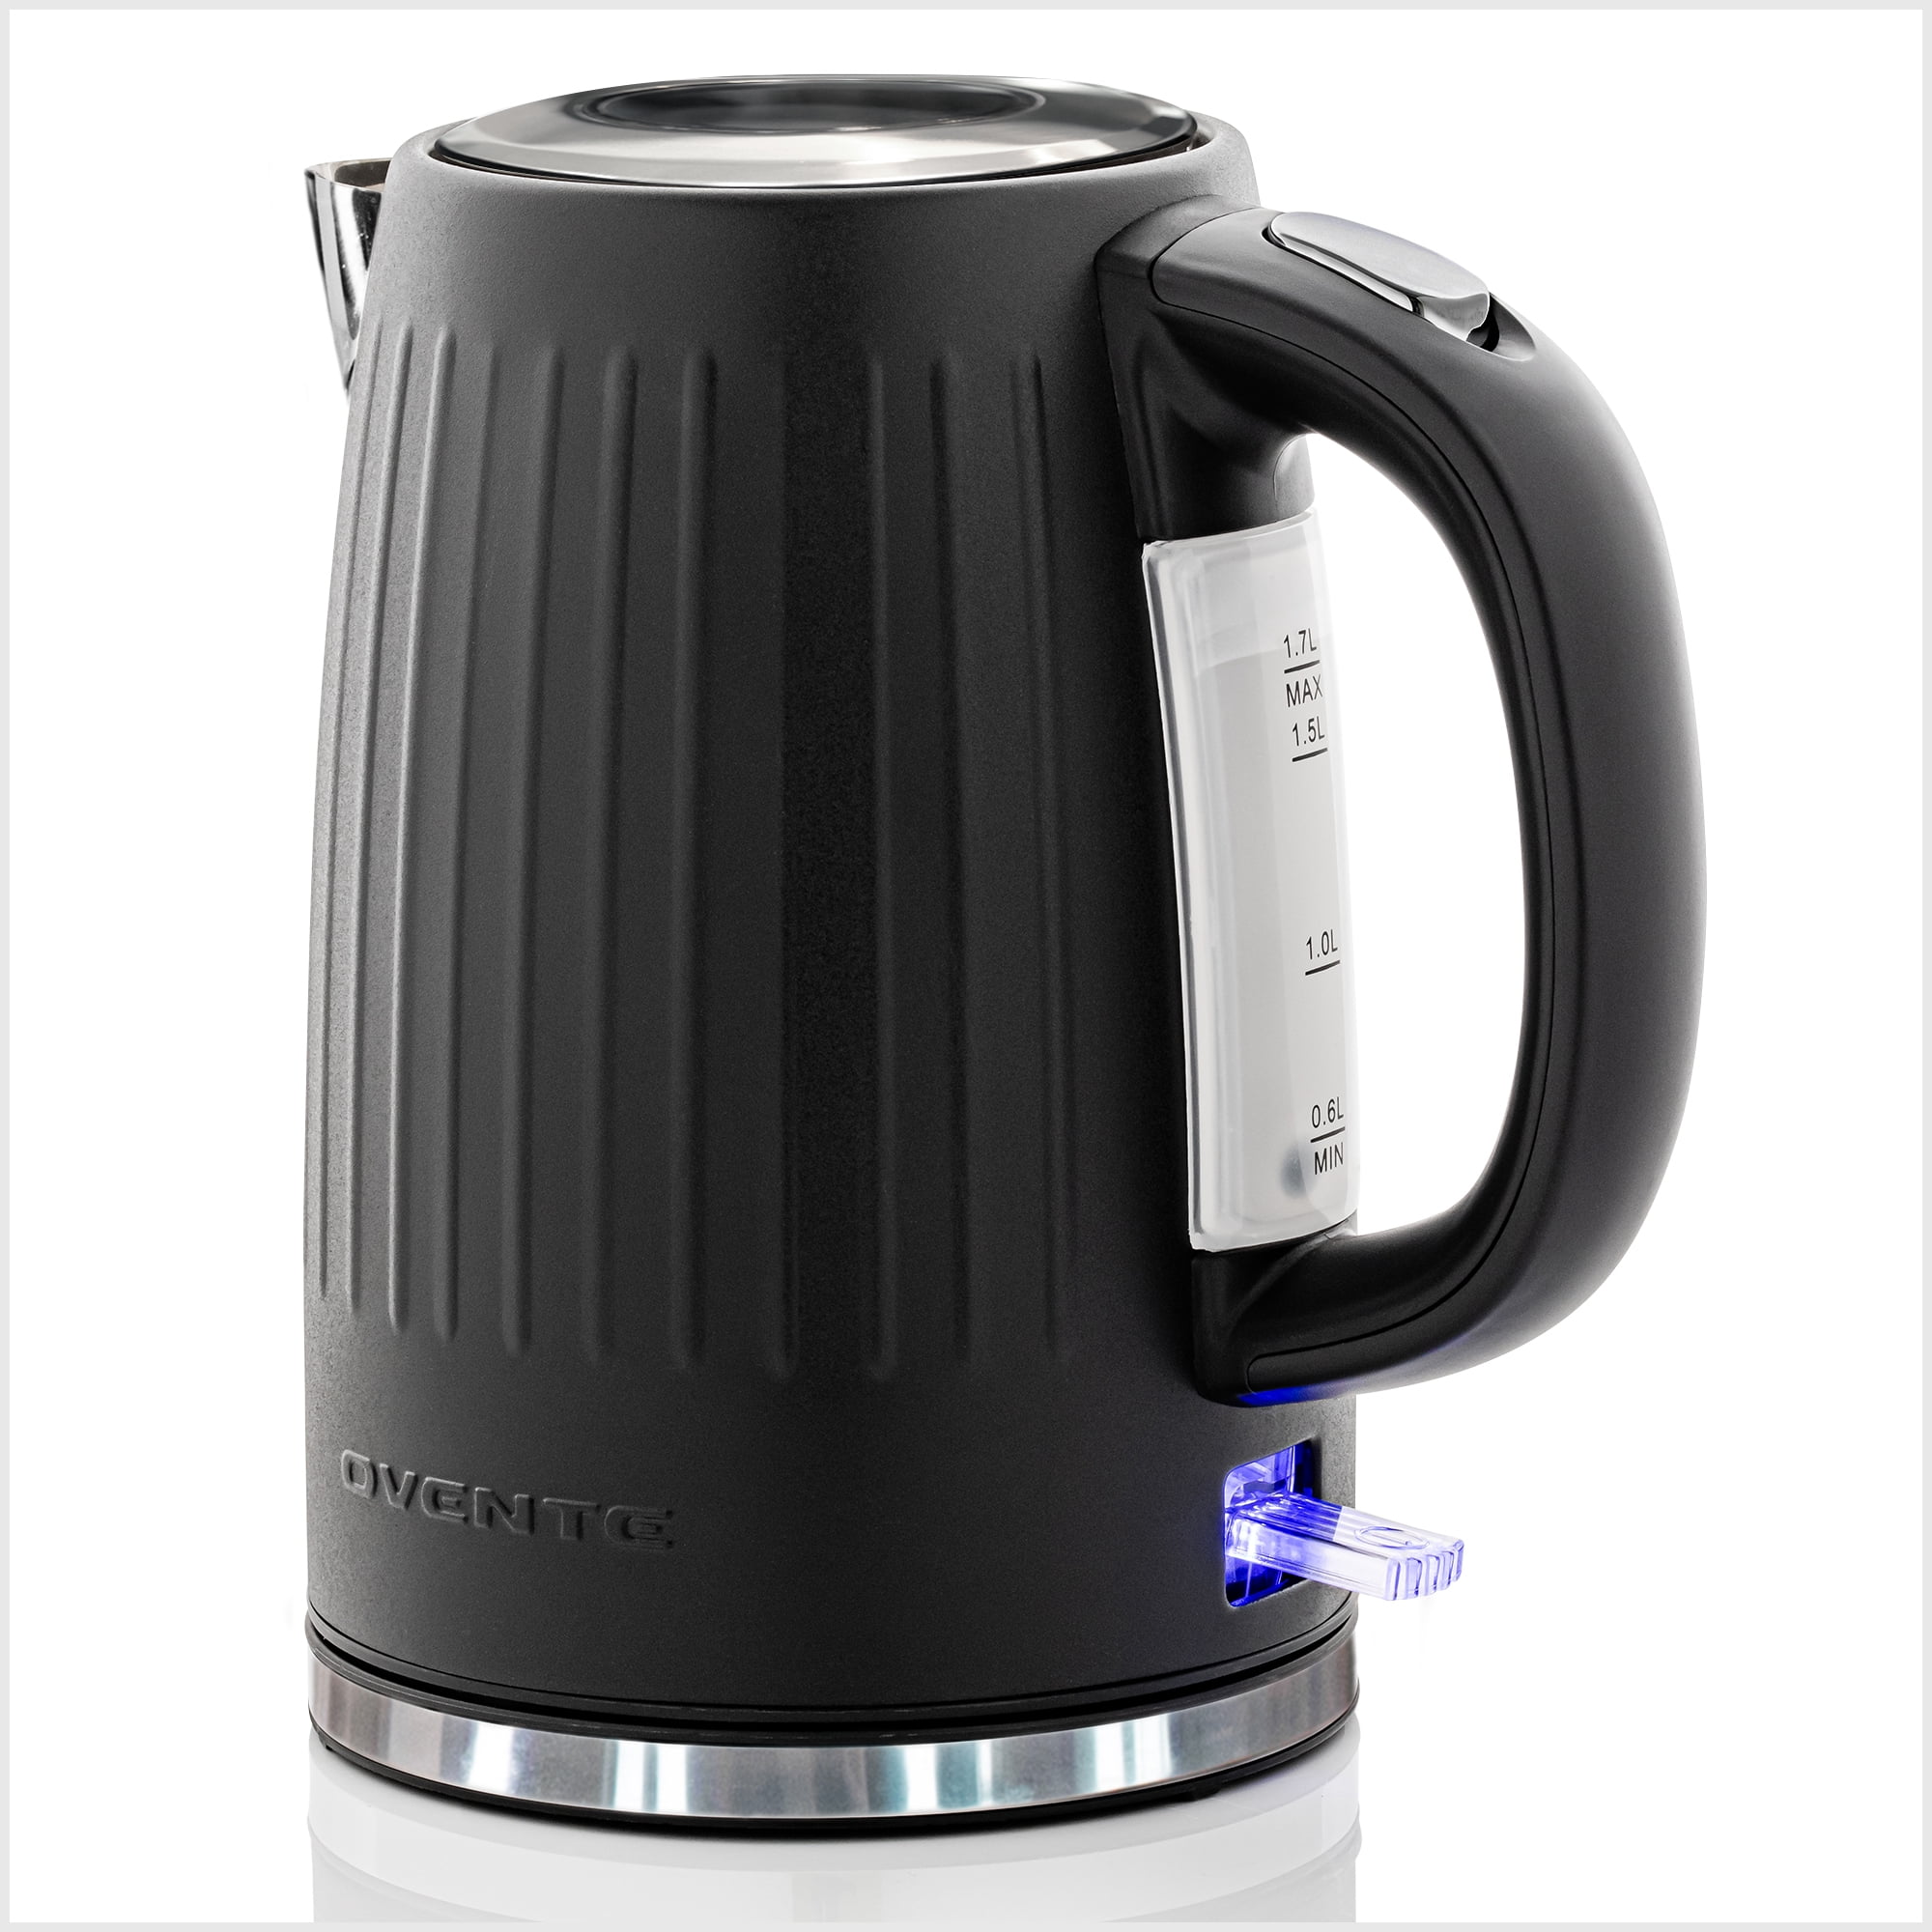 Basics Stainless Steel Fast, Portable Electric Hot Water Kettle for  Tea and Coffee, 1.7-Liter, Black and Sliver